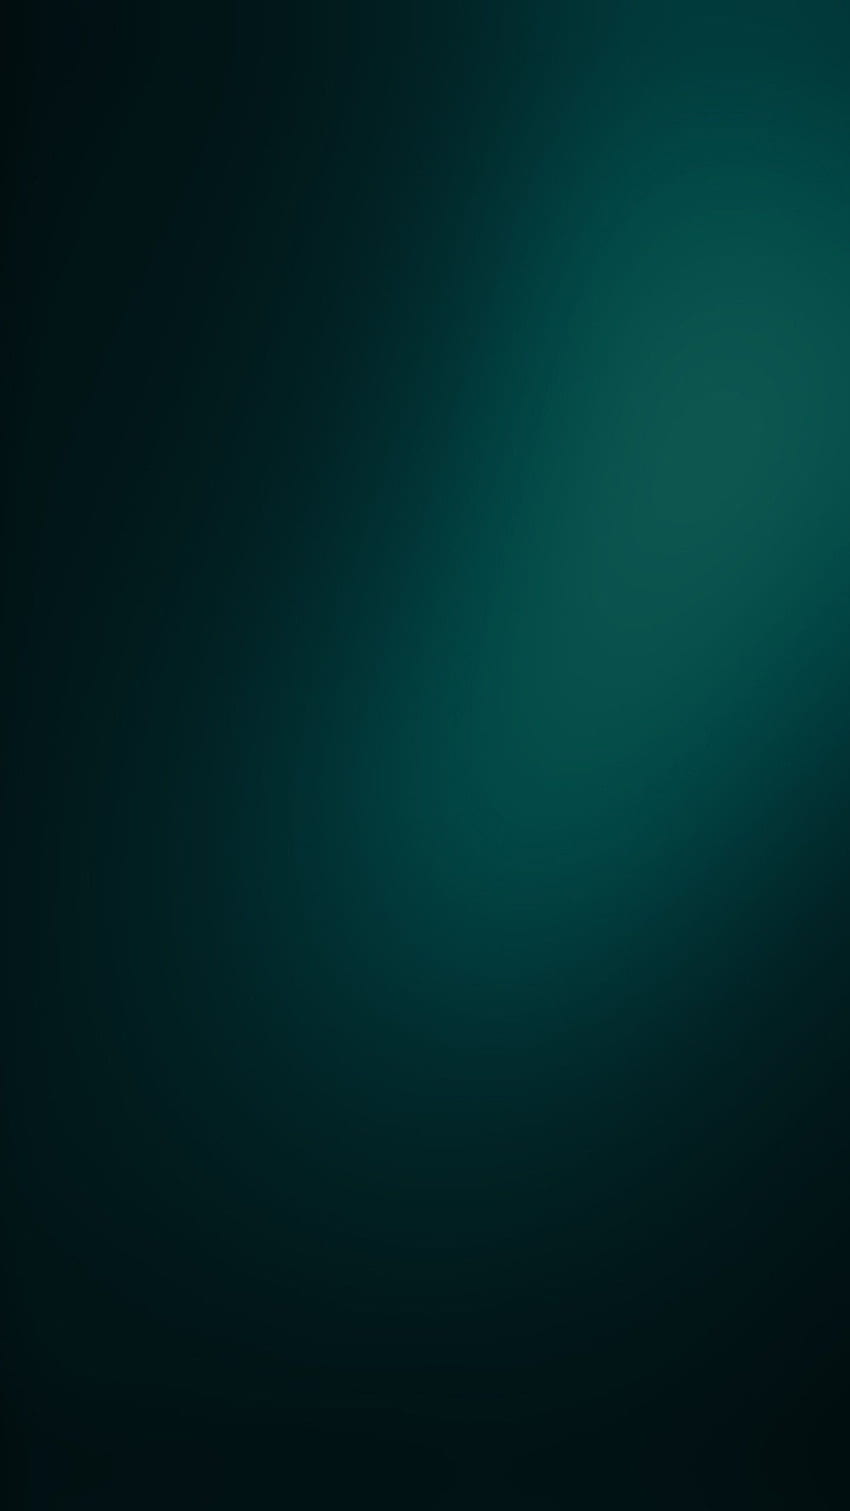 Teal iPhone, Turquoise and Black HD phone wallpaper